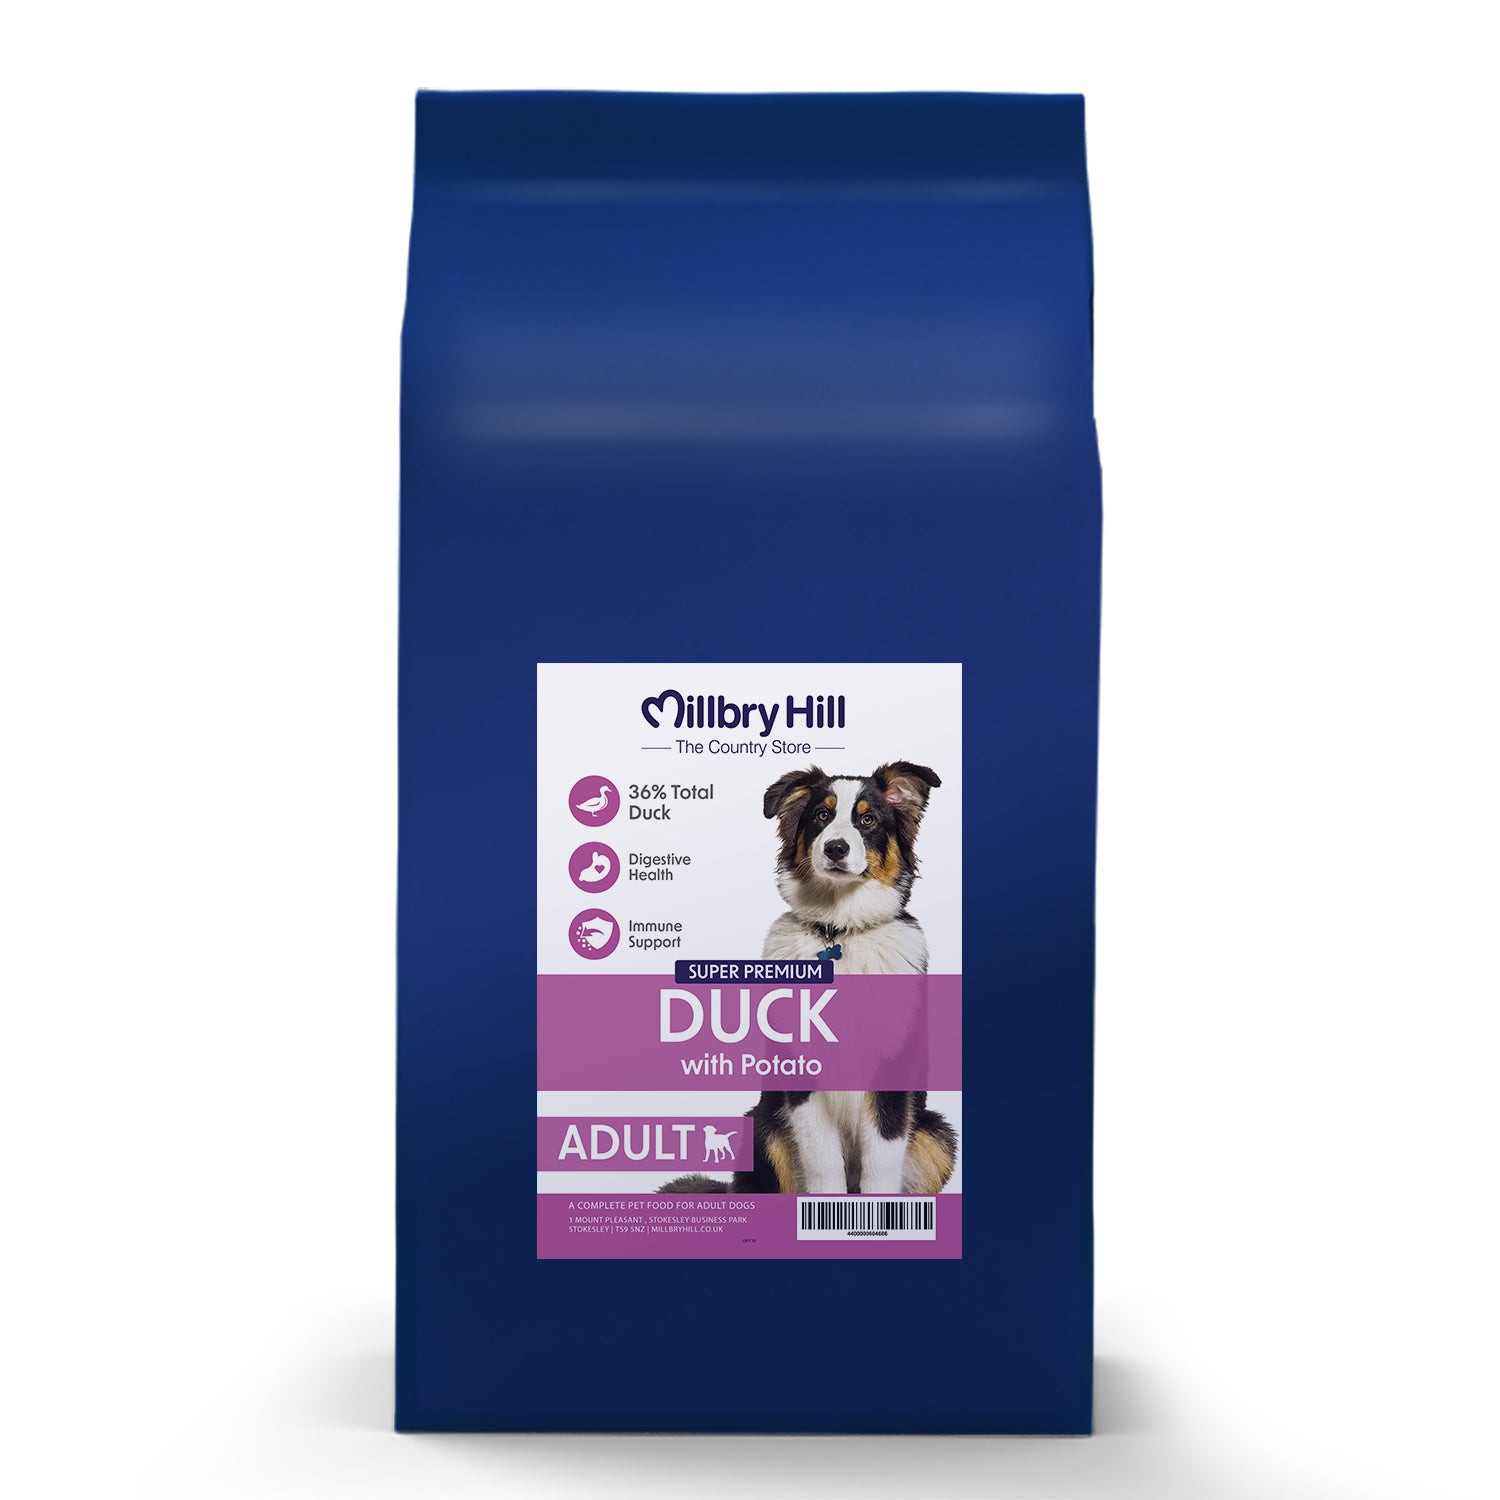 Millbry Hill Adult Duck with Potato Dog Food